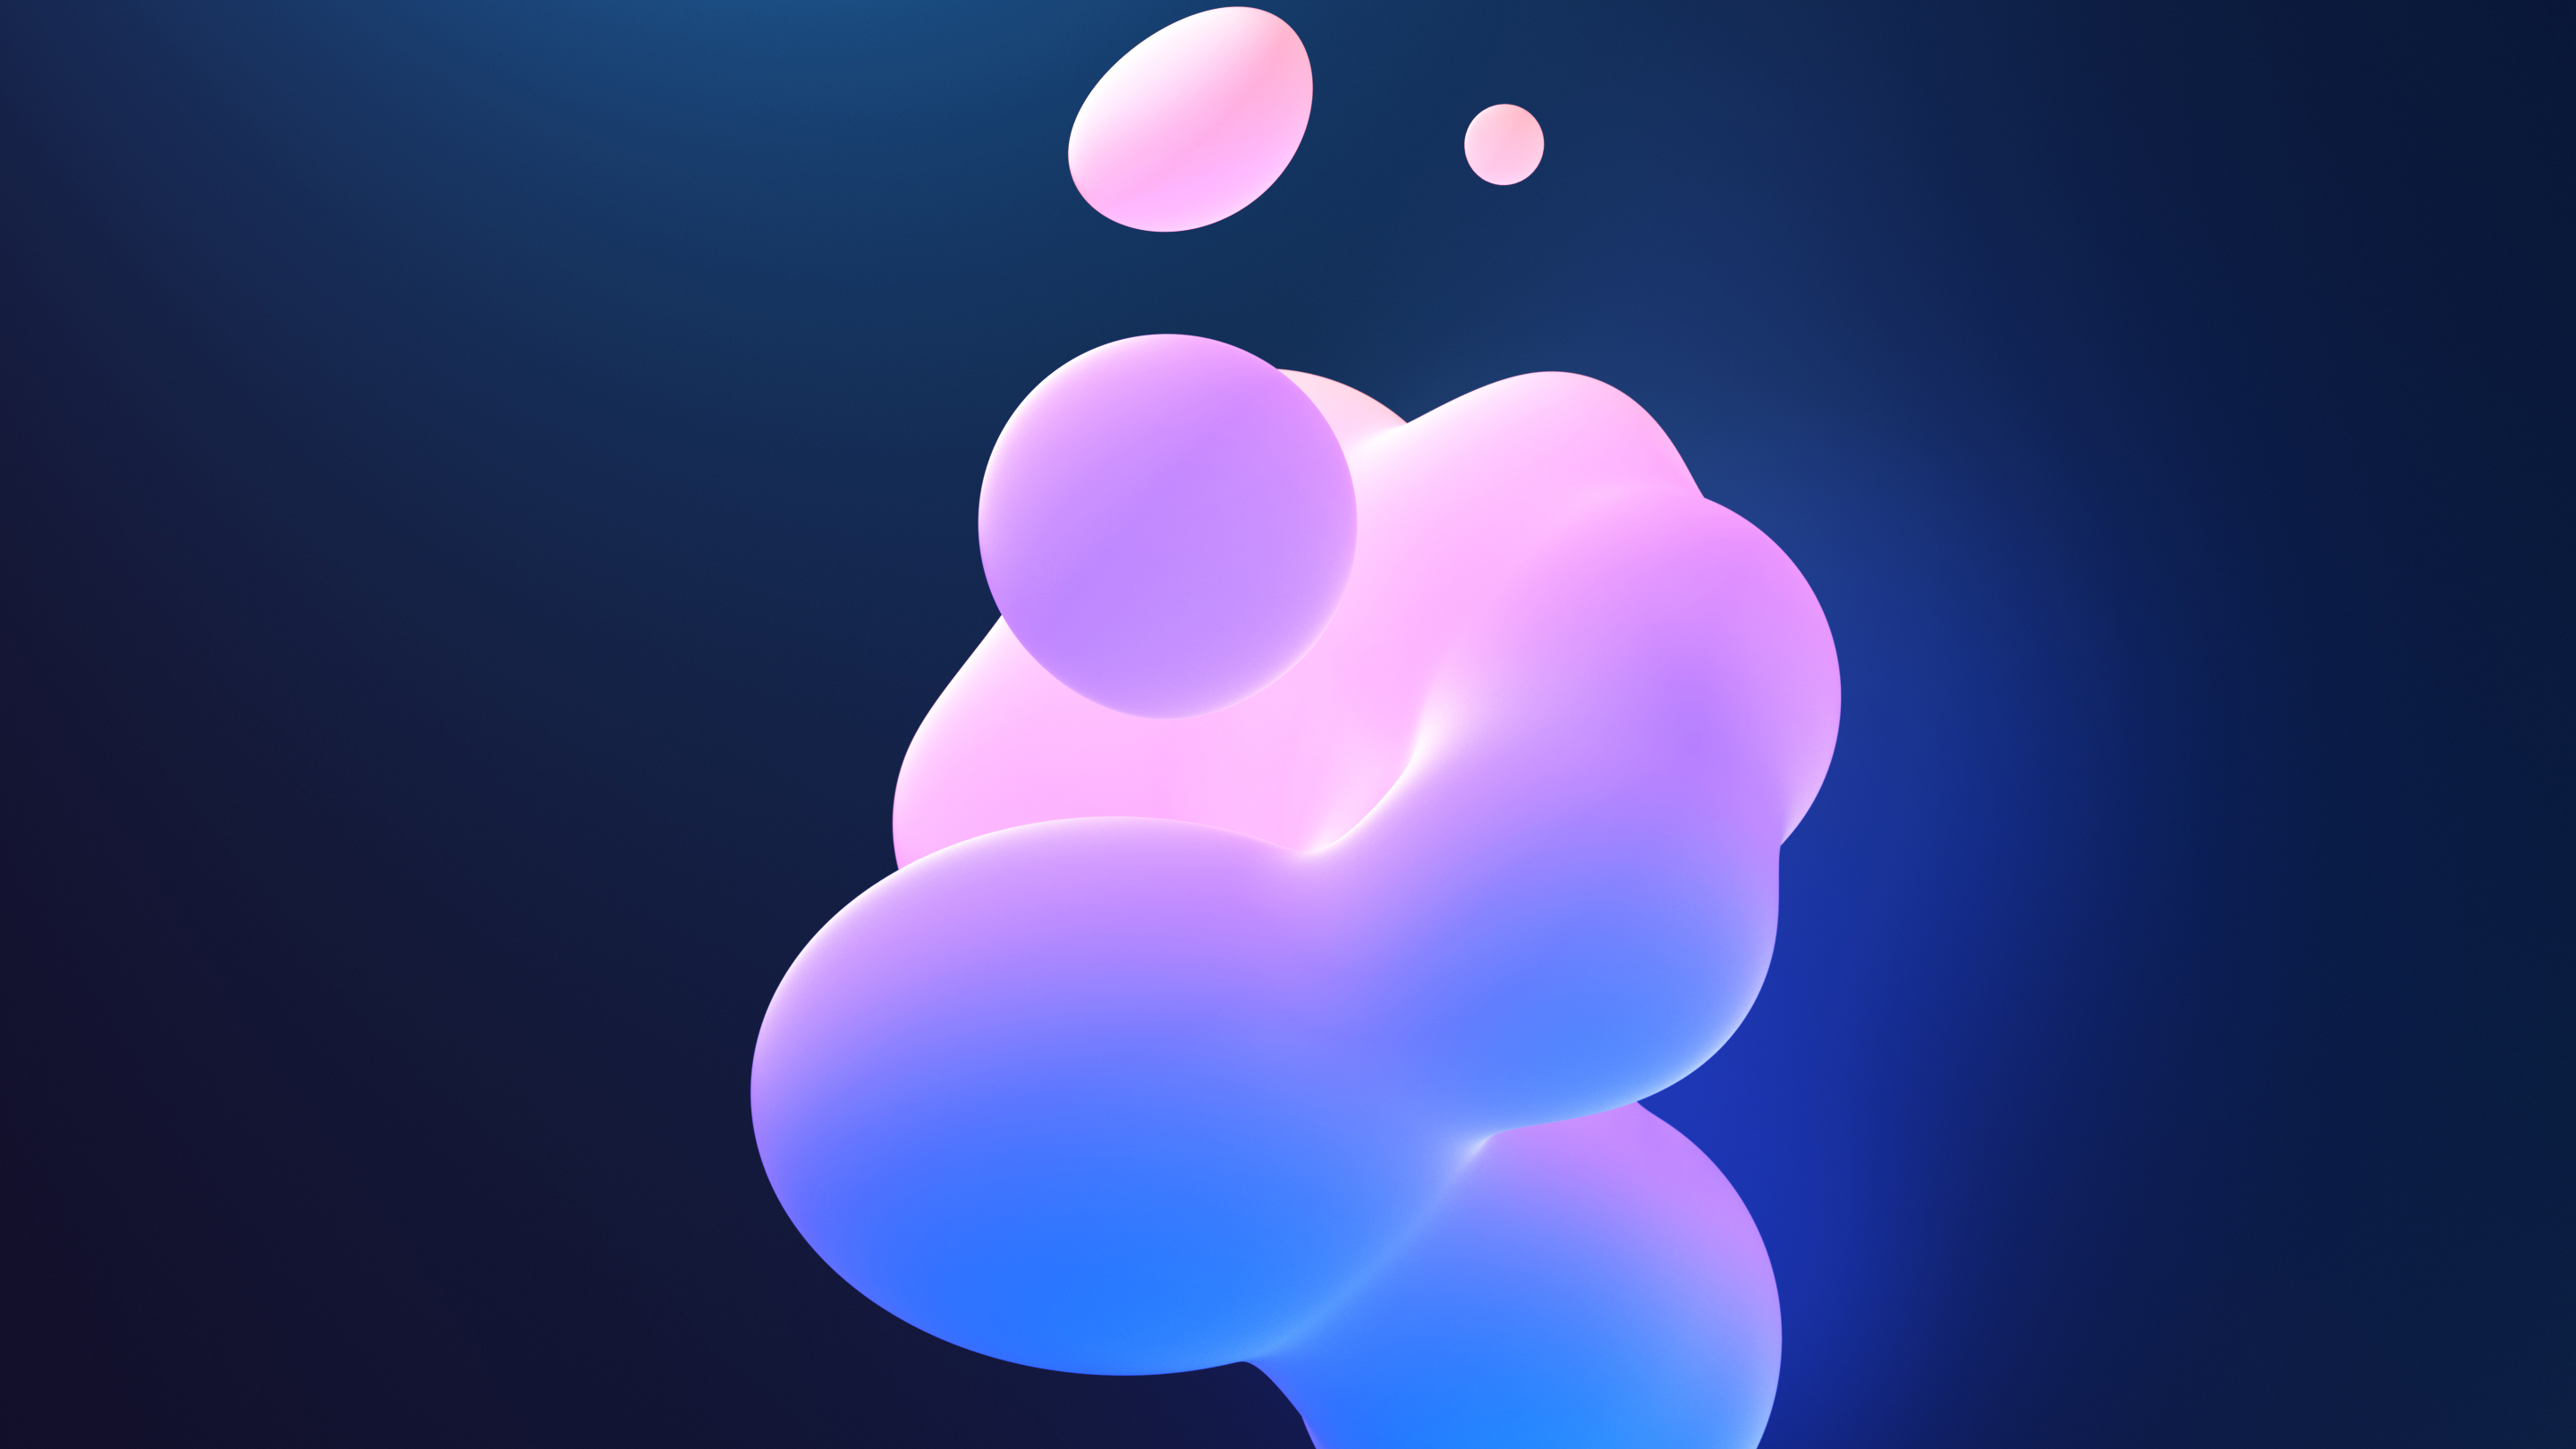 Abstract Bubble 2880x1620